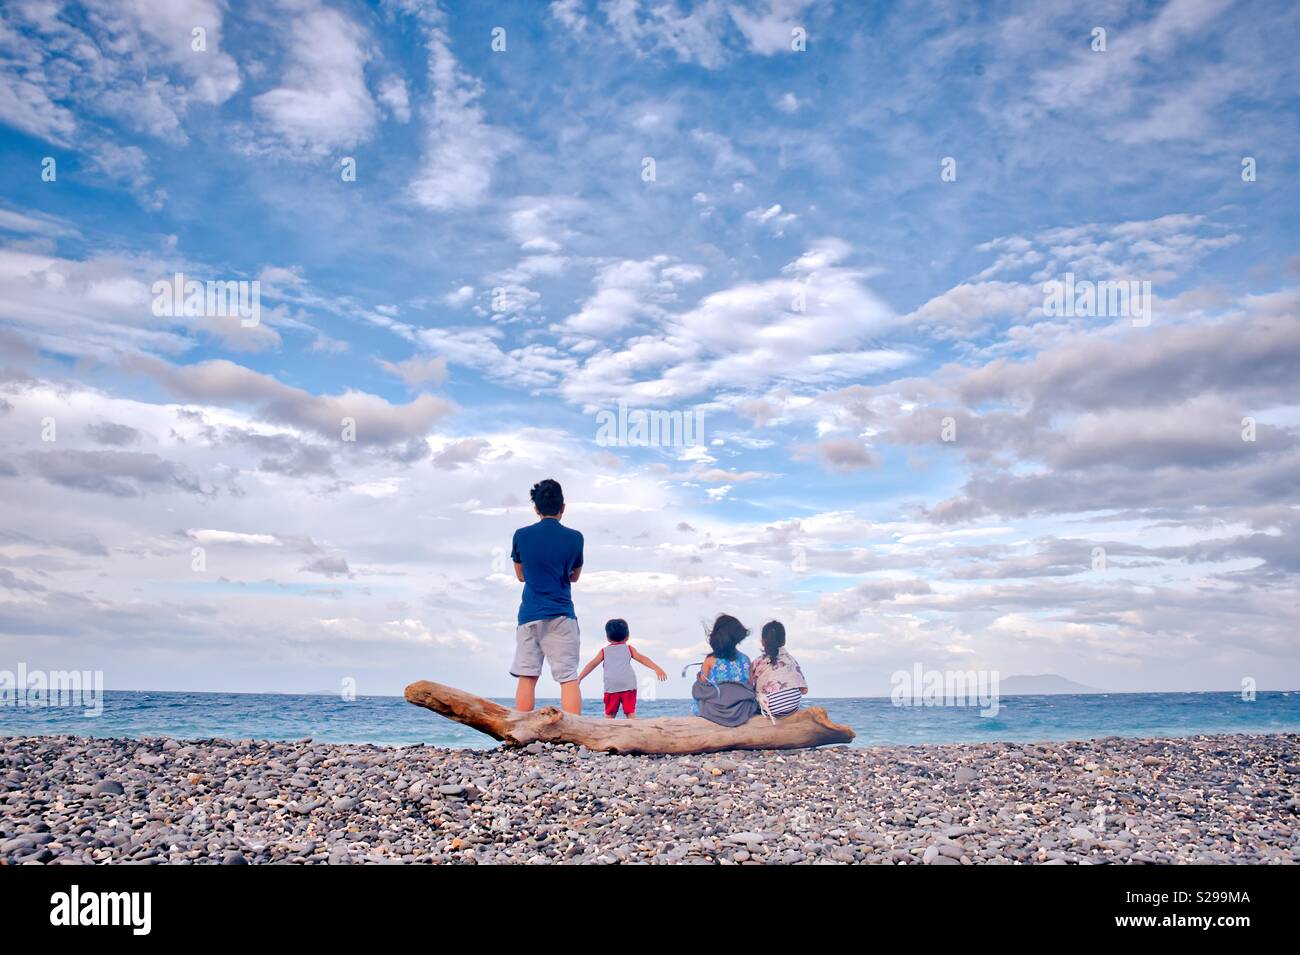 Siblings by the beach under the cloudy skies. Stock Photo